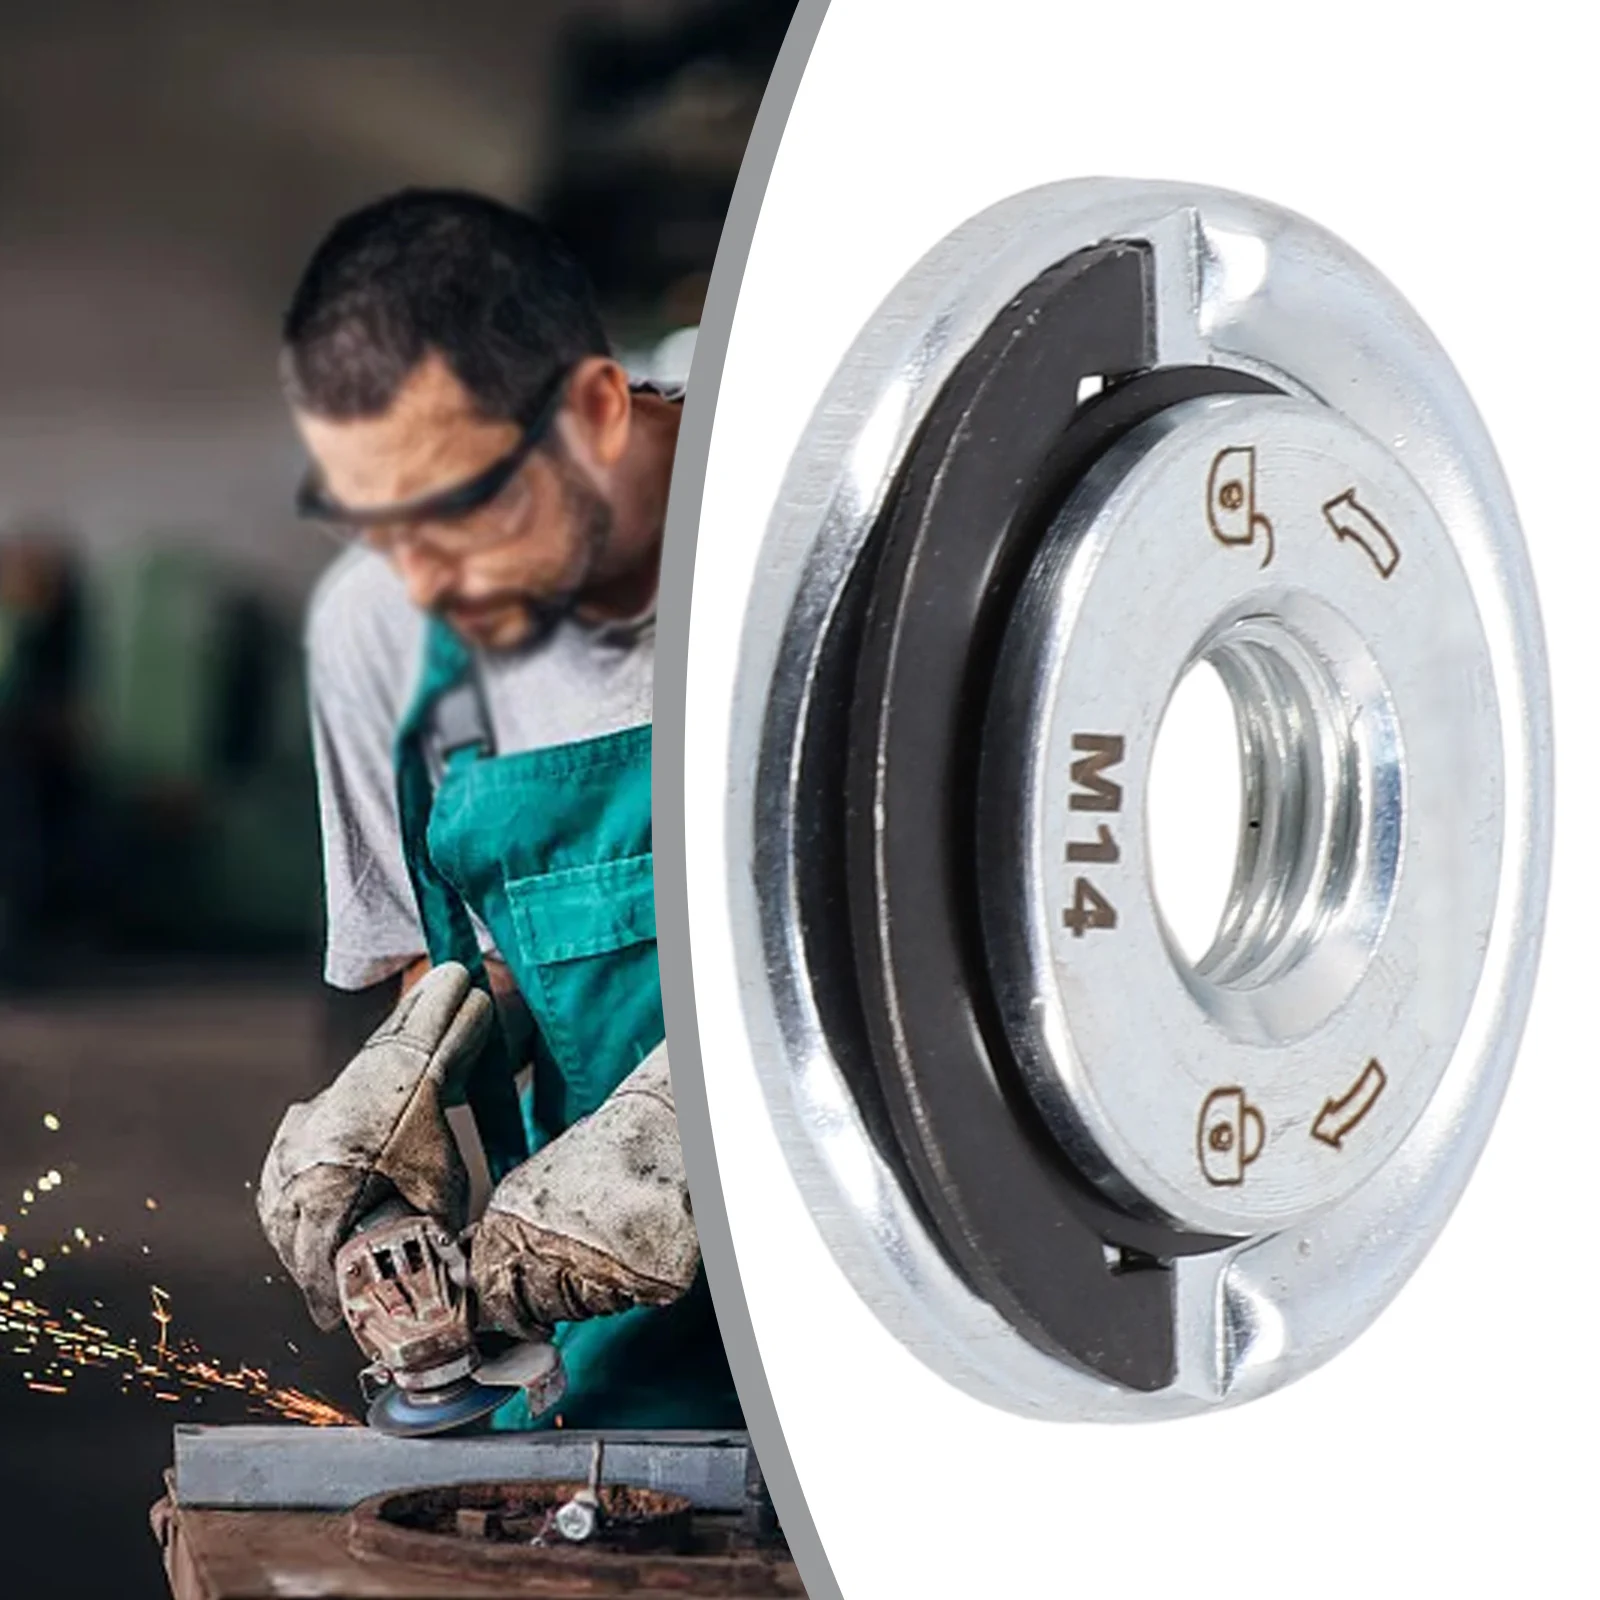 M14 SelfLocking Grinder Pressing Plate Flange Nut Improve Grinding Efficiency, Innovative Design, Easy to Install 9 inch radio fascia fit for fiat uno 2015 left hand drive stereo dvd player install surround trim panel kit car face plate frame